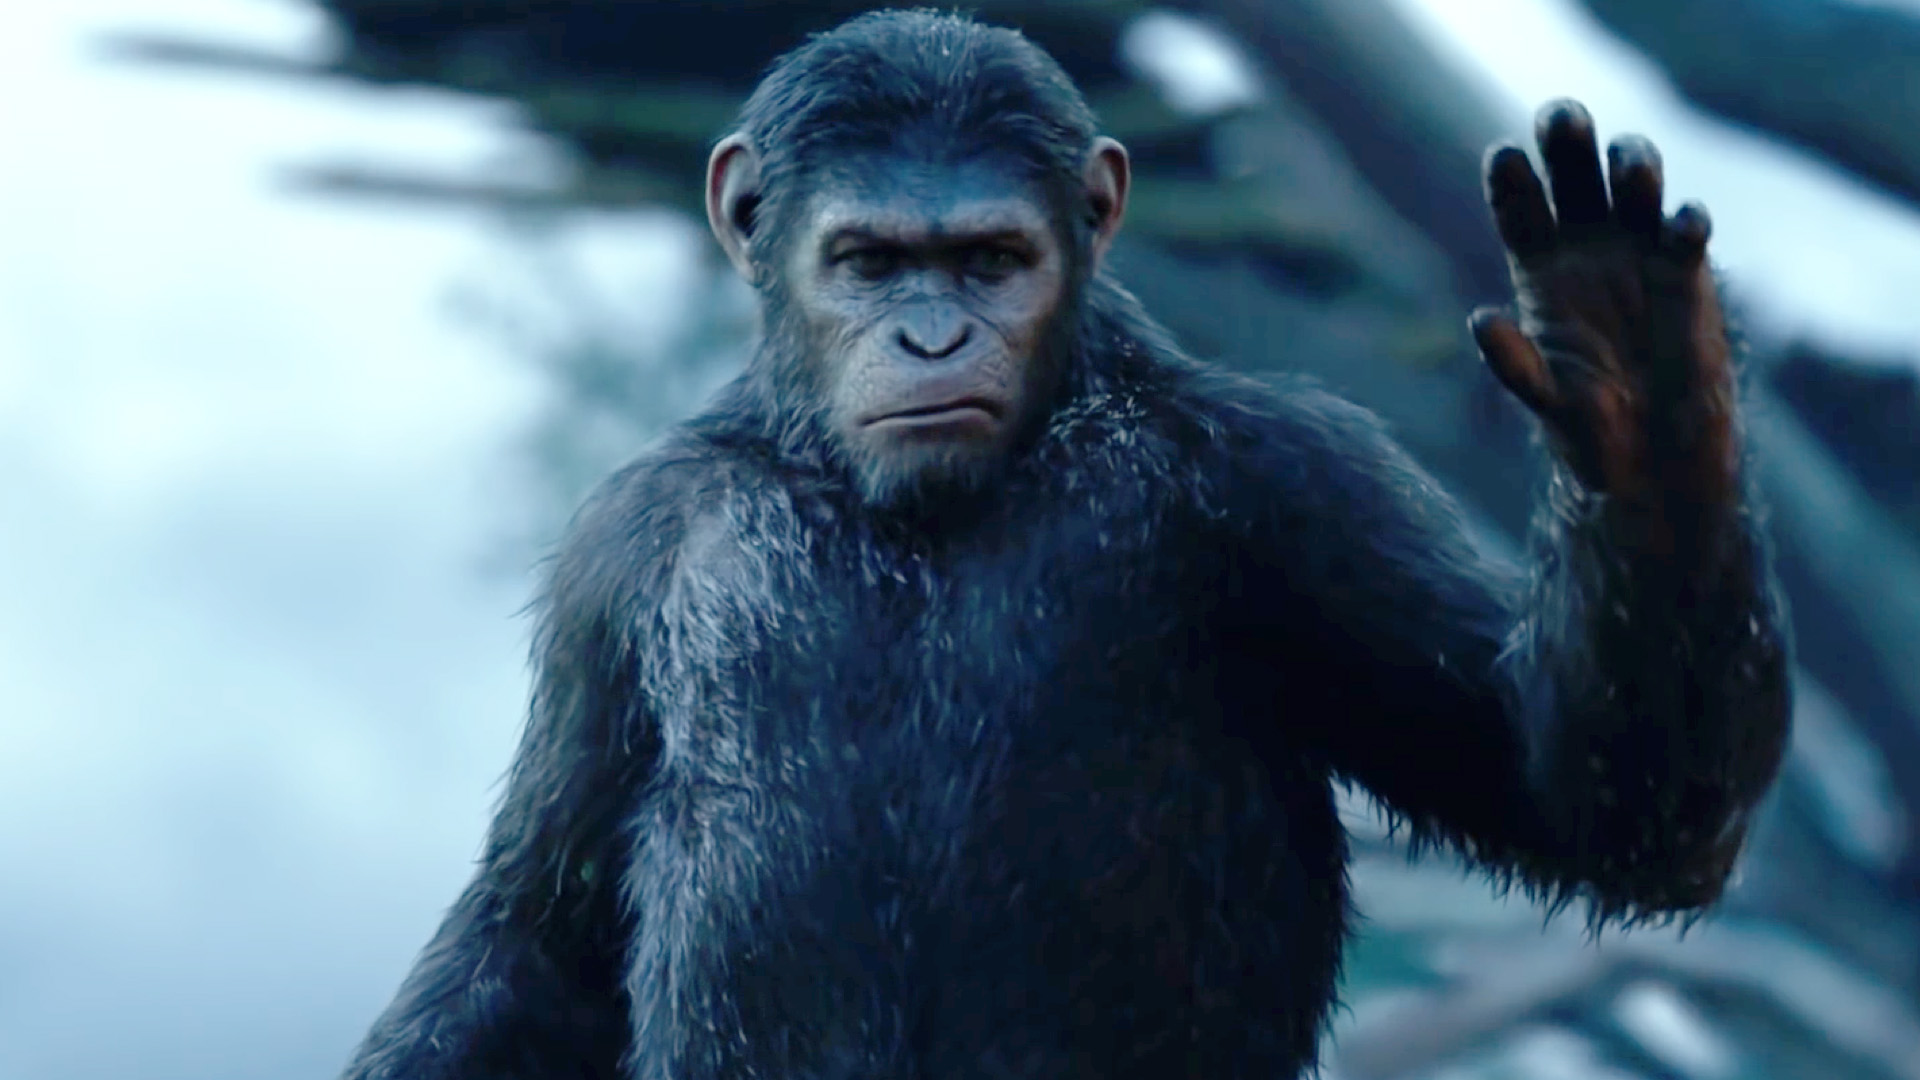 Dawn of the Planet of the Apes (2014) | Fandango